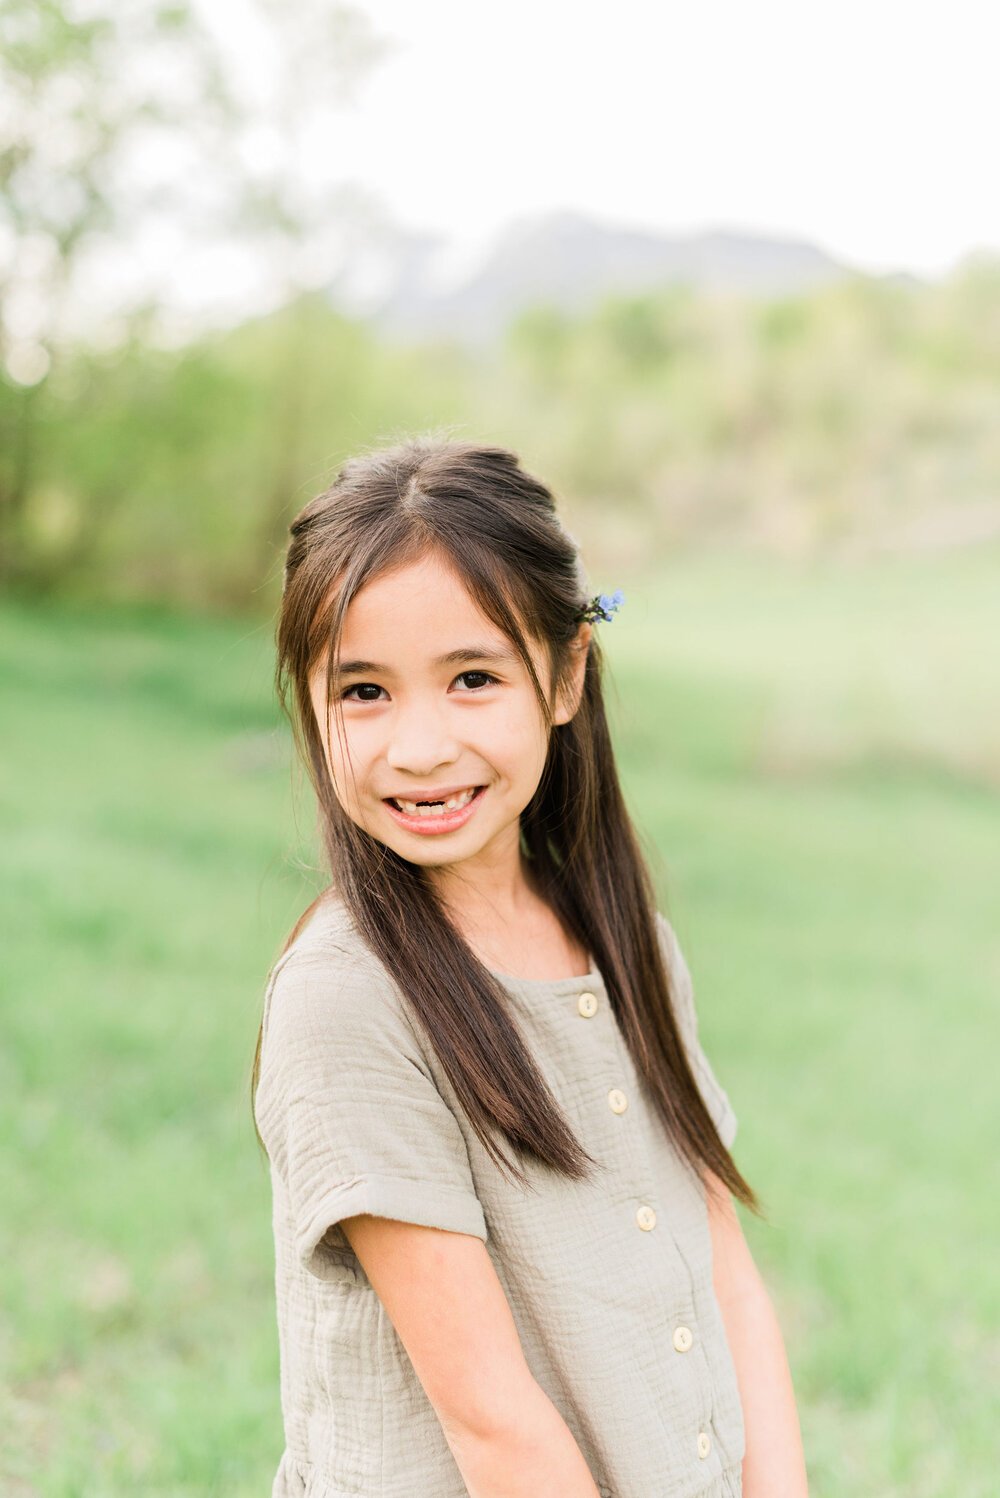  A little girl shyly smiles for a portrait photo taken by Jacquie Erickson, an Atlanta-based photographer. Personalized kid's portraits capture their childhood Fayetteville Peachtree City&nbsp; #childportraits #childrenphotographer #georgiaphotograph